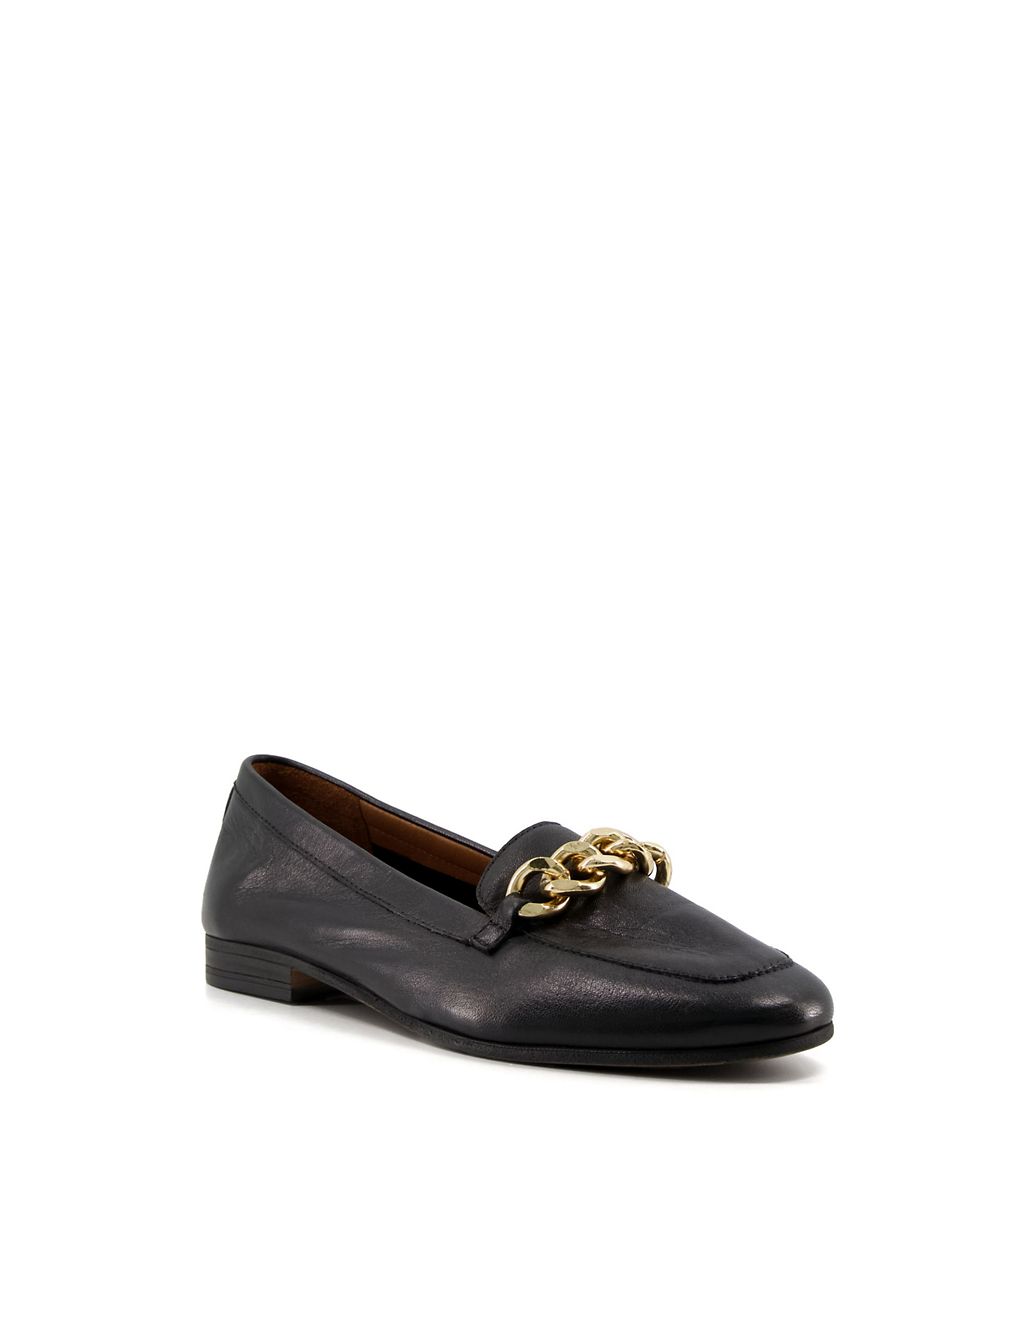 Leather Chain Detail Flat Loafers | Dune London | M&S